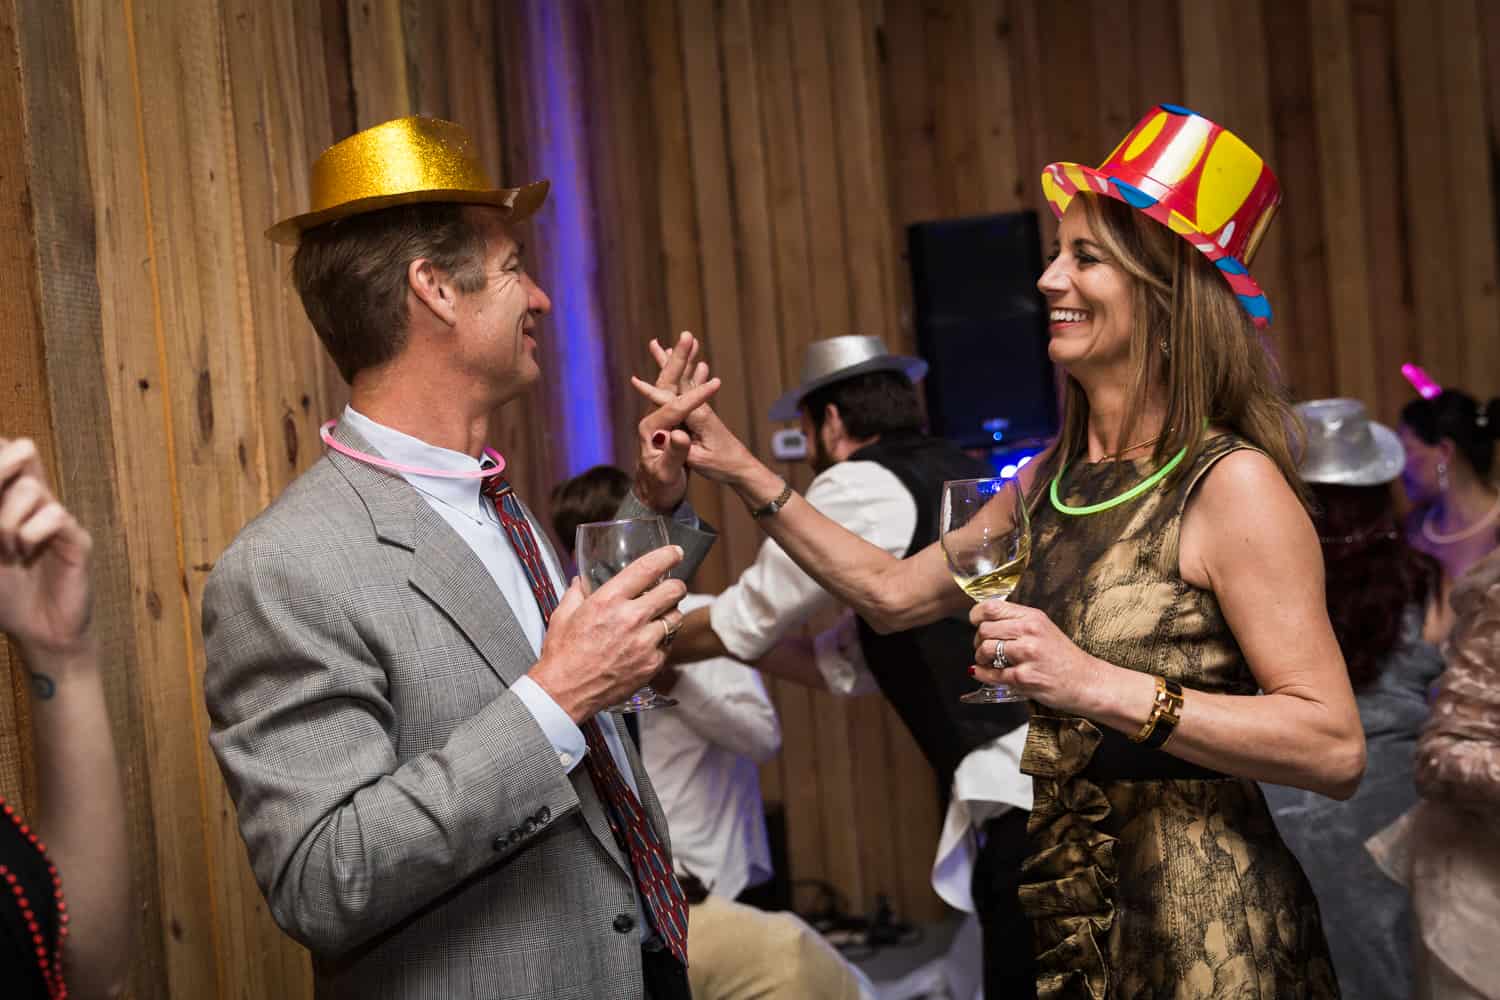 Couple wearing party hats and dancing during Florida wedding reception